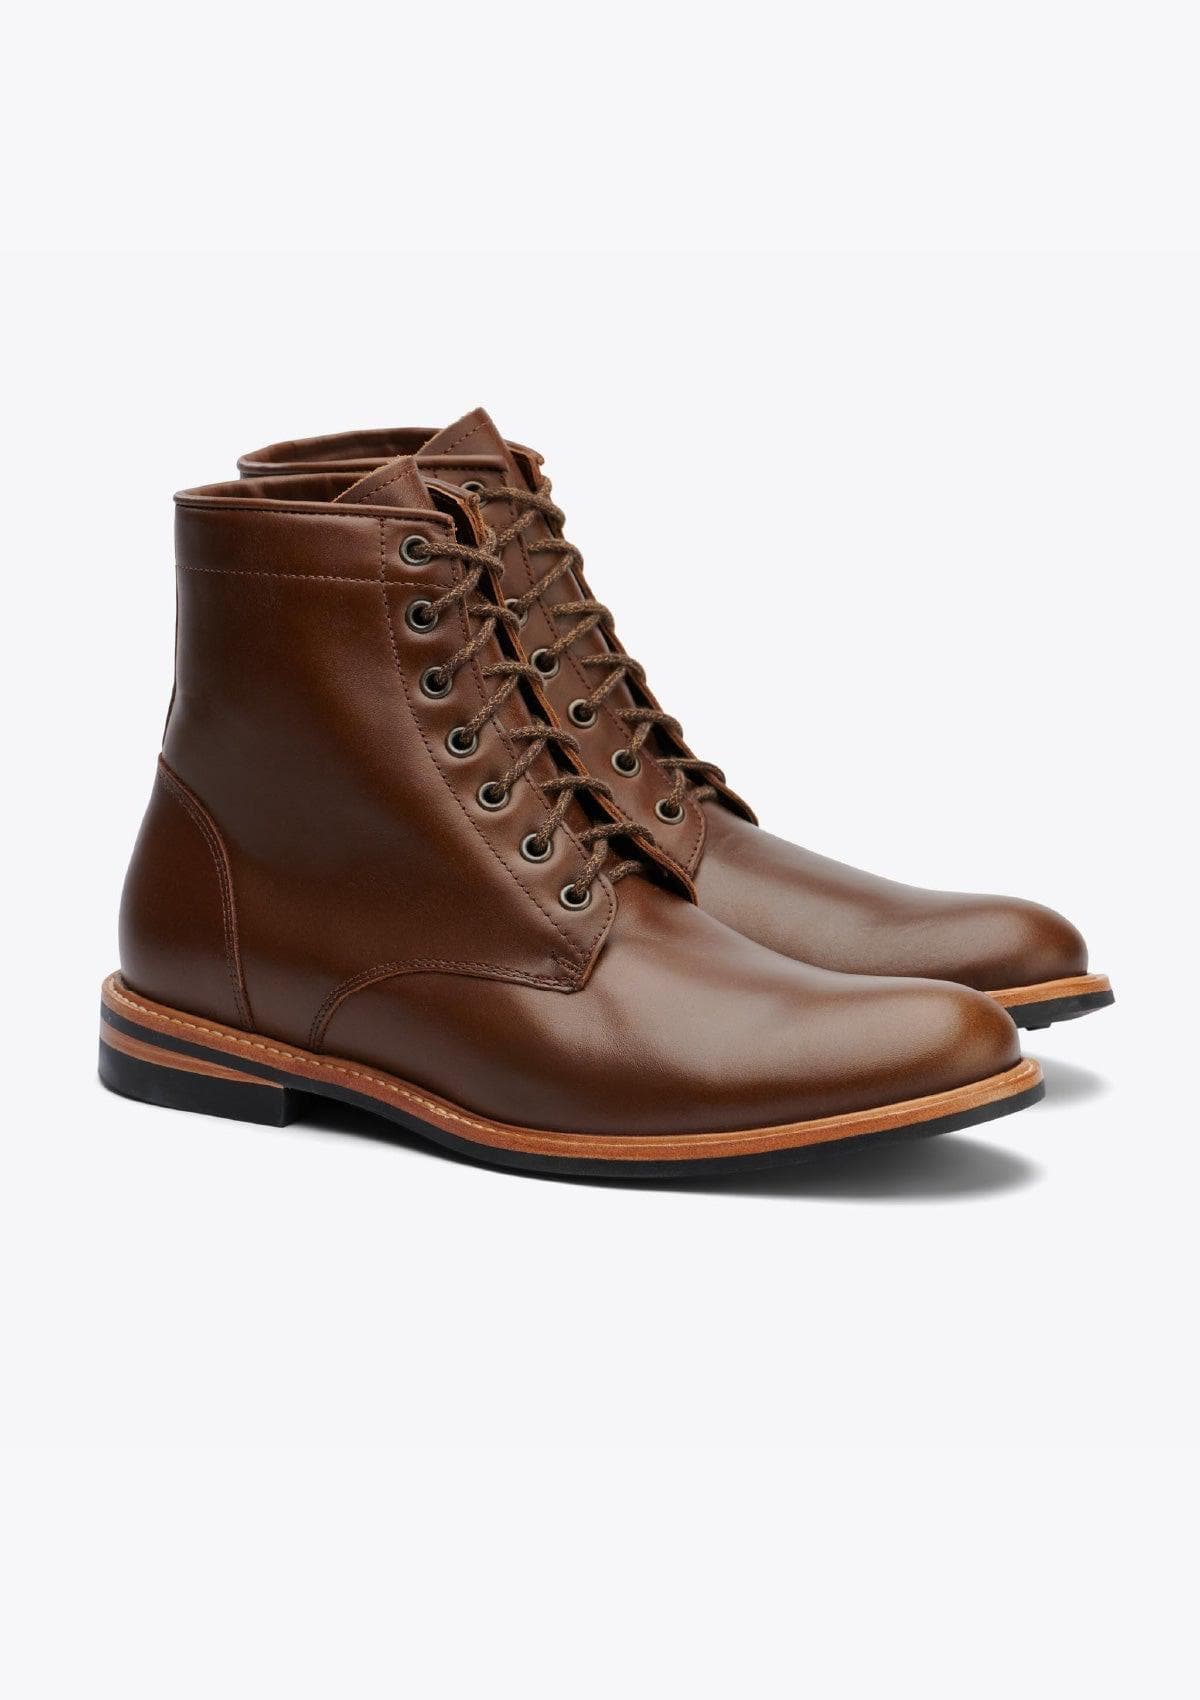 All-Weather Andres Boots - Brown